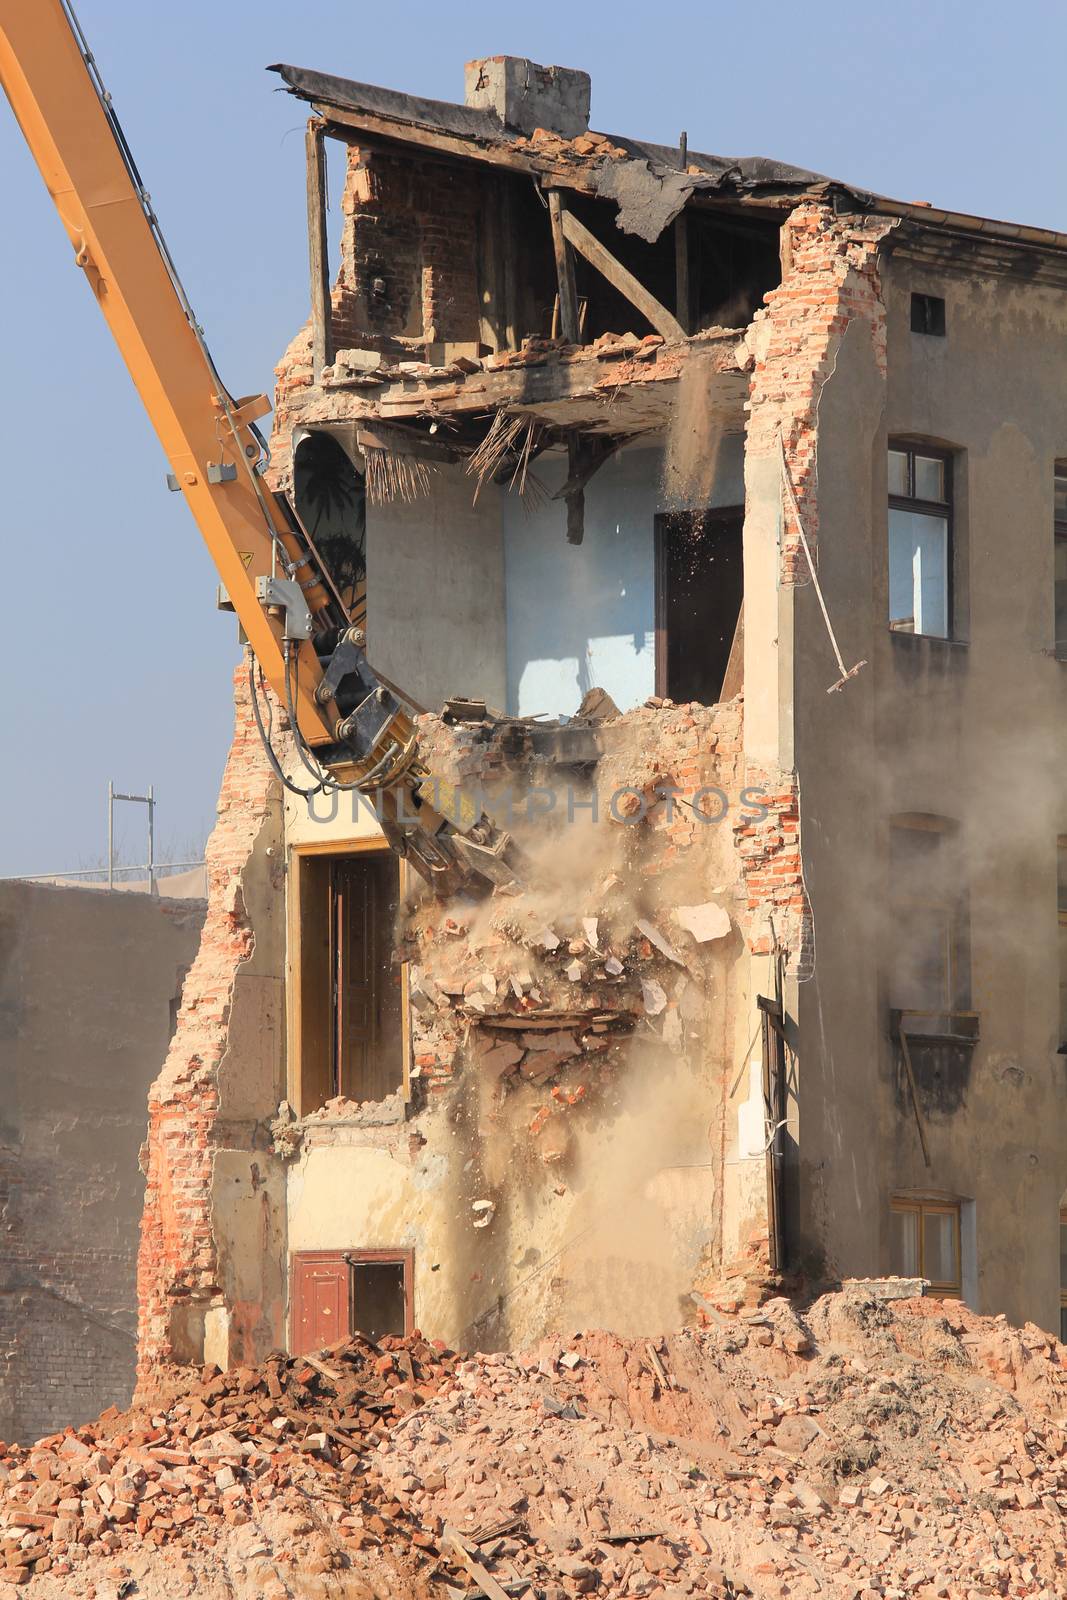 Demolition of the old building in the town by MichalLudwiczak